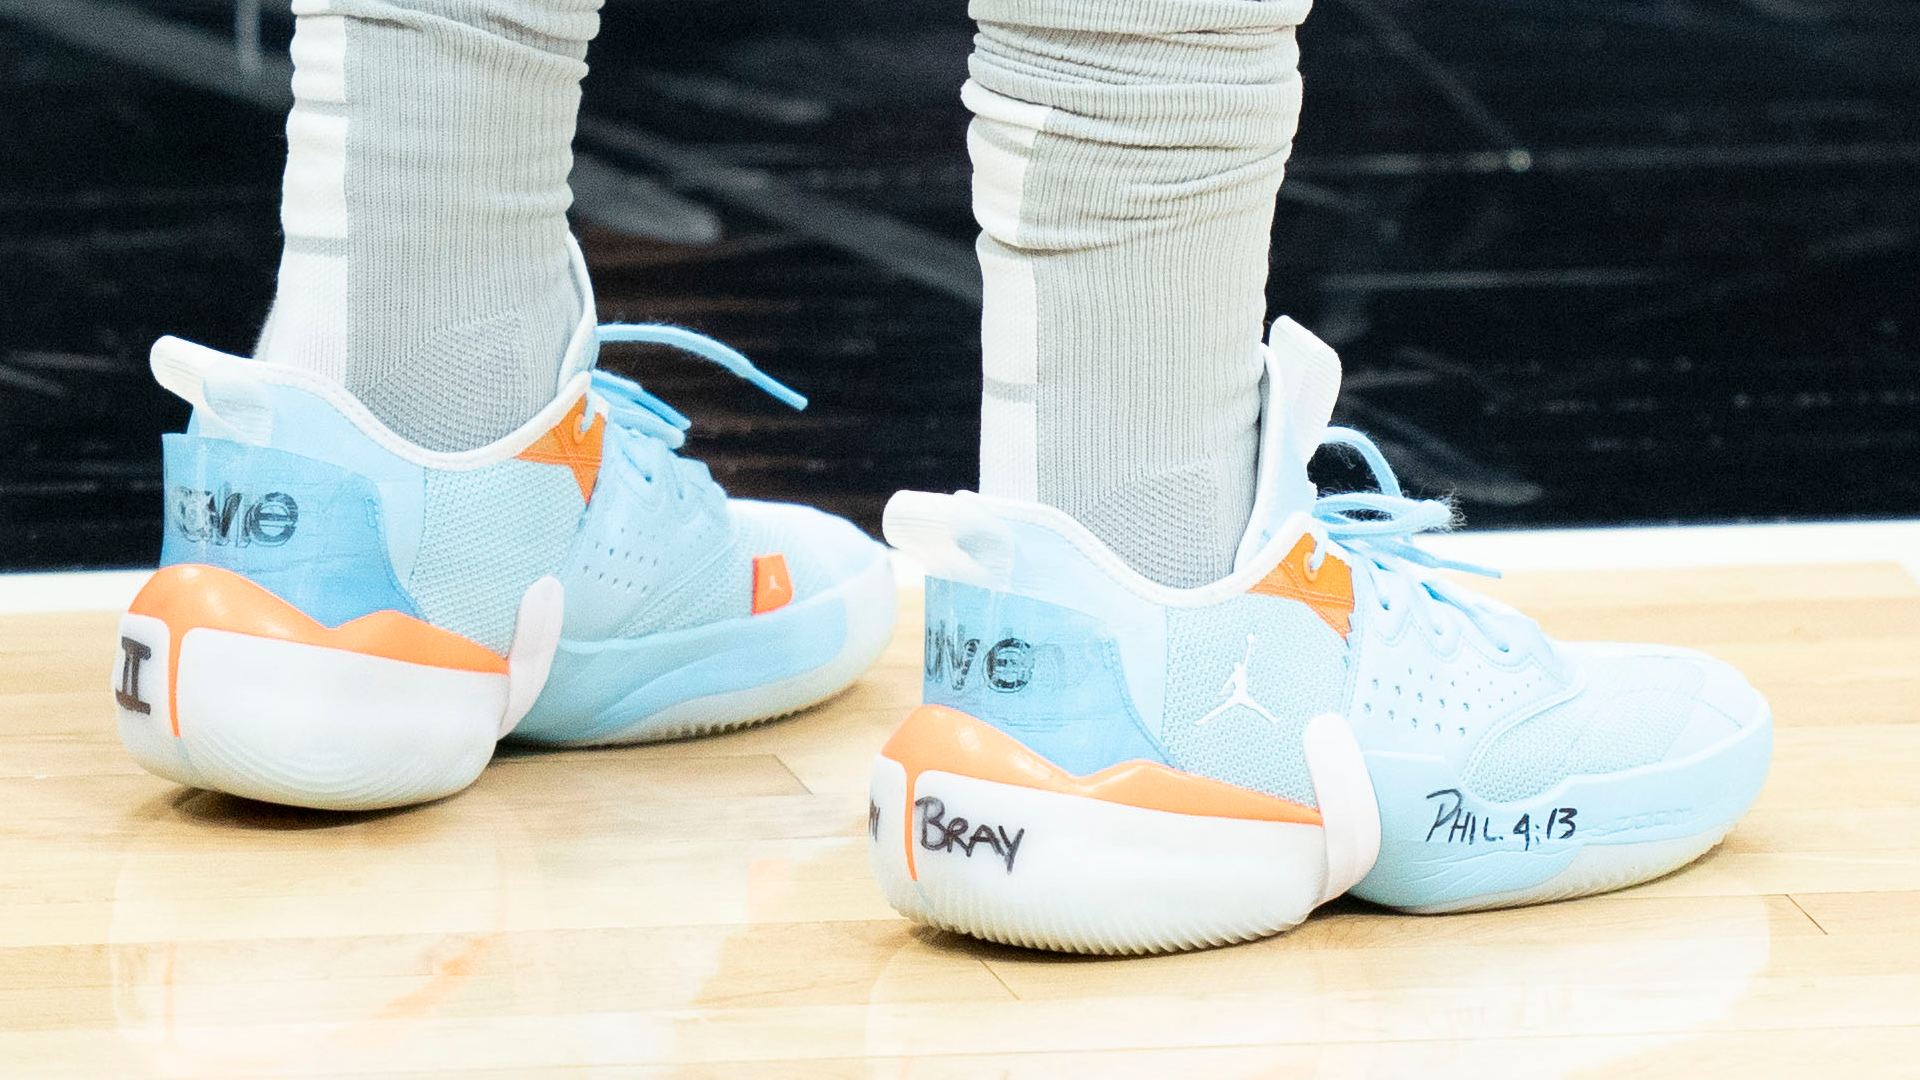 Faith and Family: What Bradley Beal Writes on His Shoes Before Games